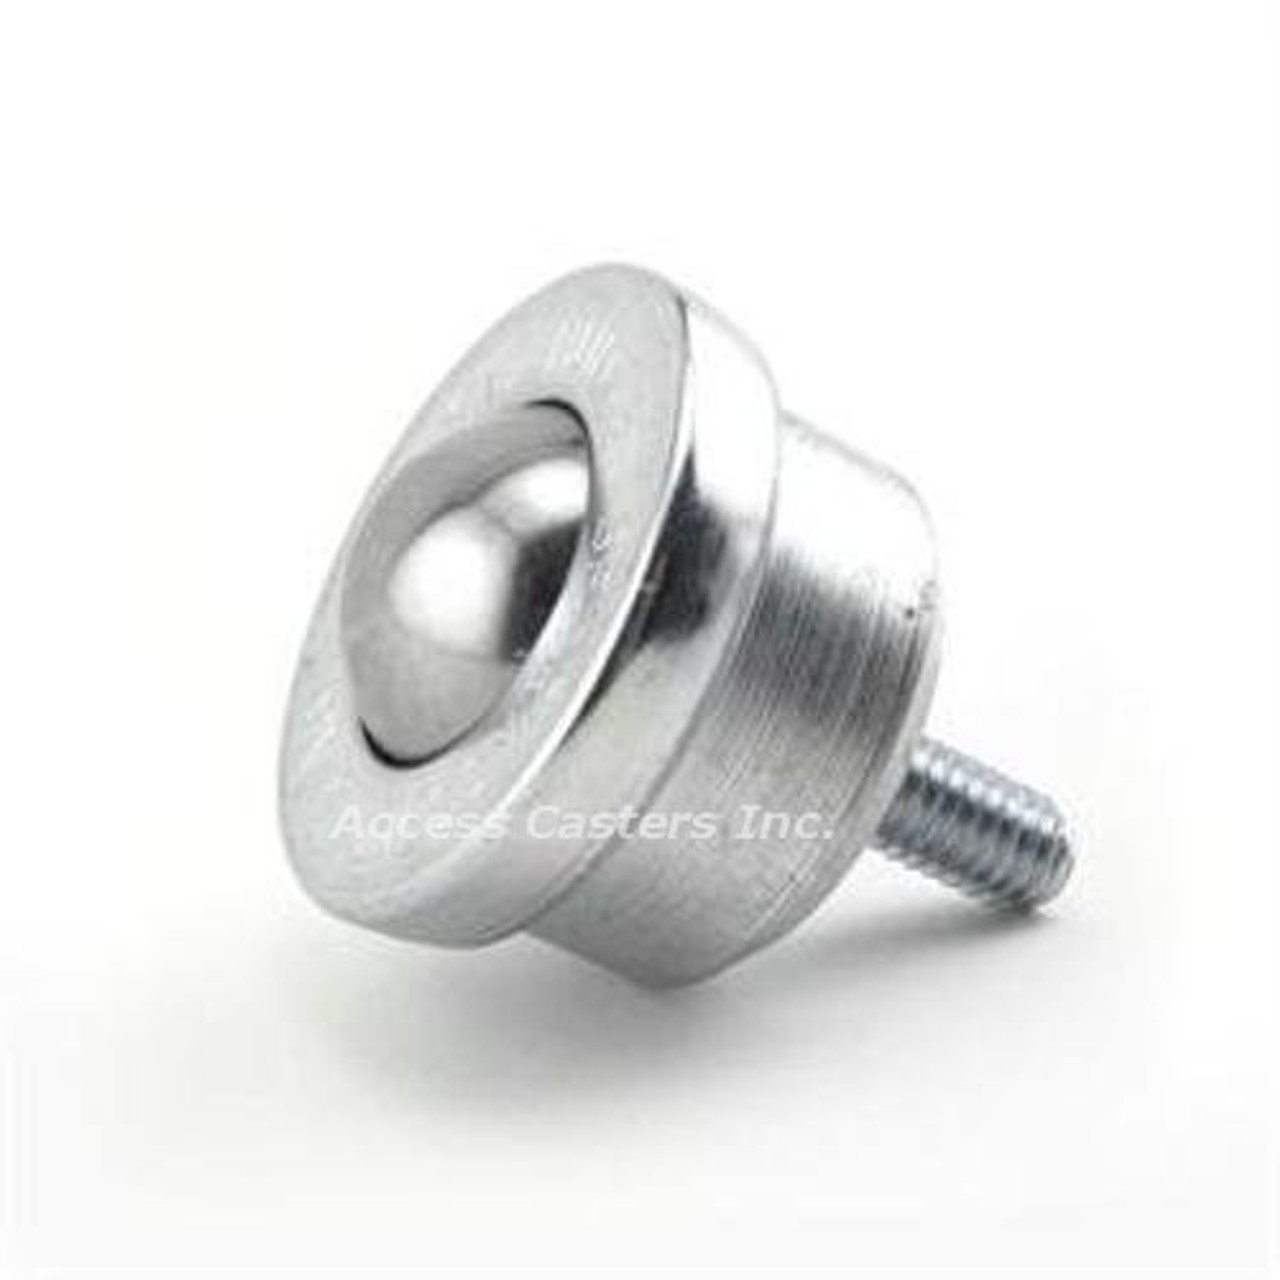 SMBT-1SS 1" Stud Mounted All Stainless Machined Ball Transfer